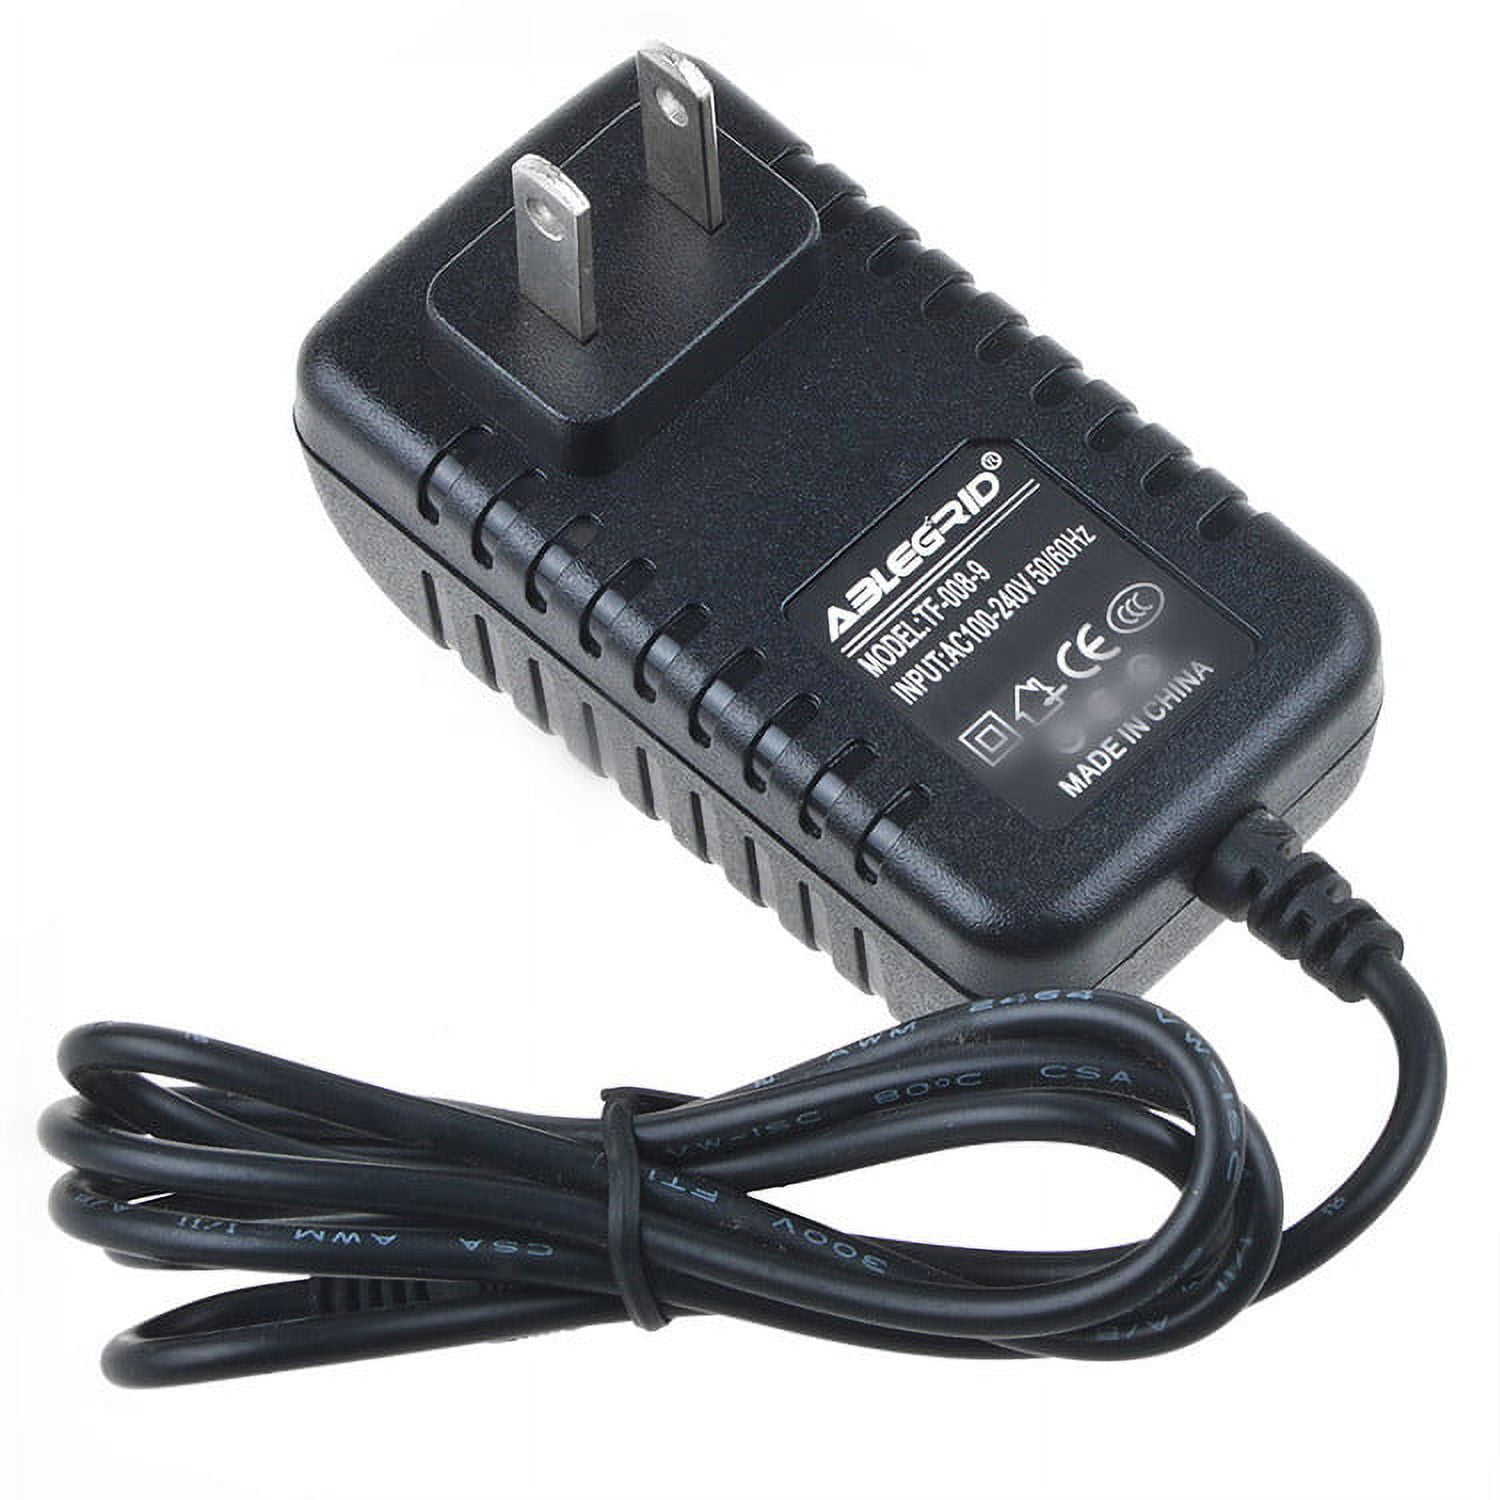 ABLEGRID AC / DC Adapter For iTomic IEBR7C Wi-Fi 7 eBook Reader MP3 Player  Power Supply Cord Cable PS Charger Input: 100 - 240 VAC 50/60Hz Worldwide 